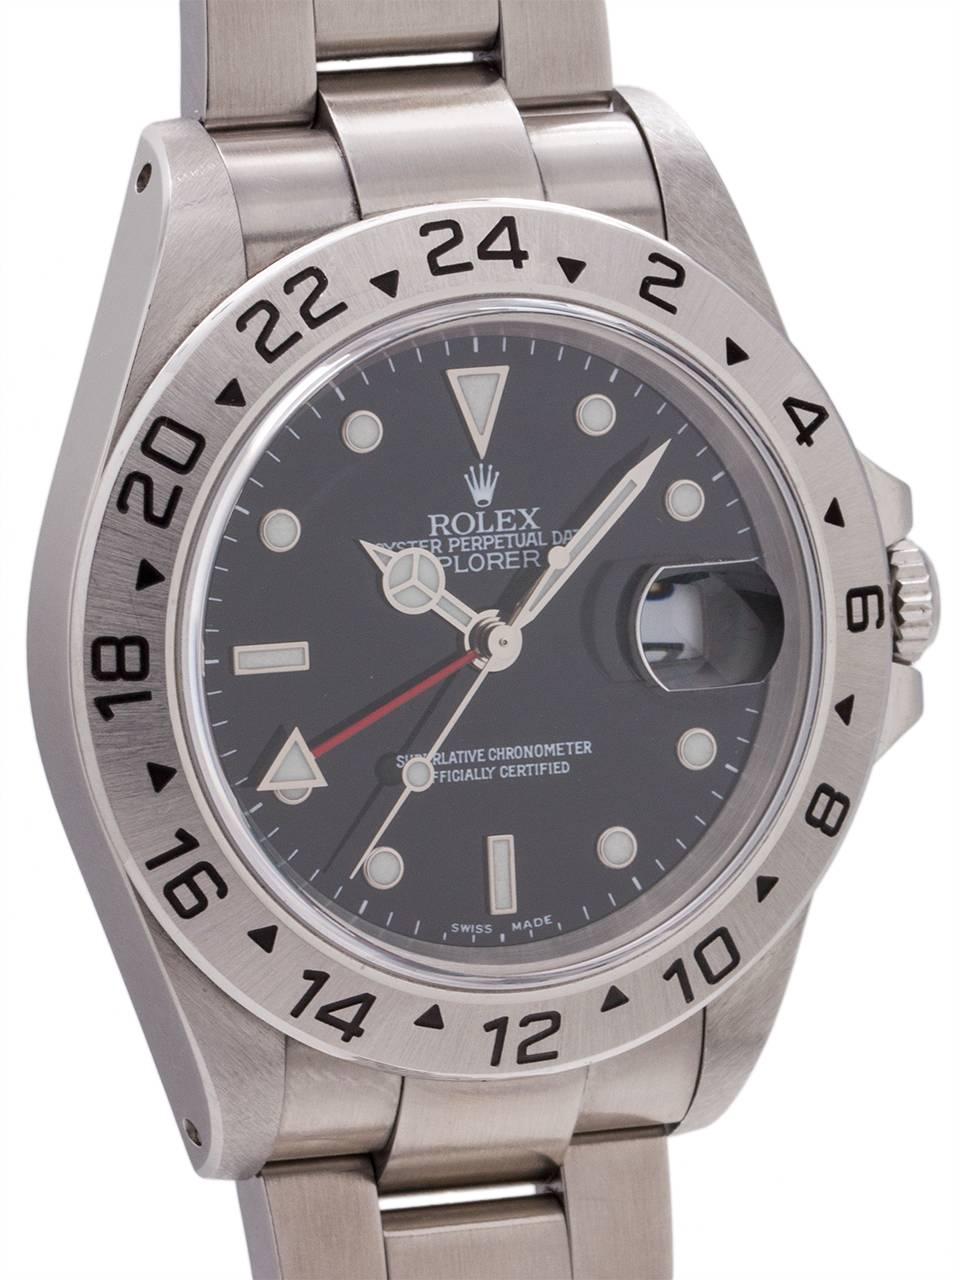 Very minty condition example Rolex Explorer II ref# 16570 serial #P, circa 2000. Featuring popular gloss black Luminova dial, with fixed 24 hour bezel, sapphire crystal, 39mm diameter case and powered by self winding movement with independently set